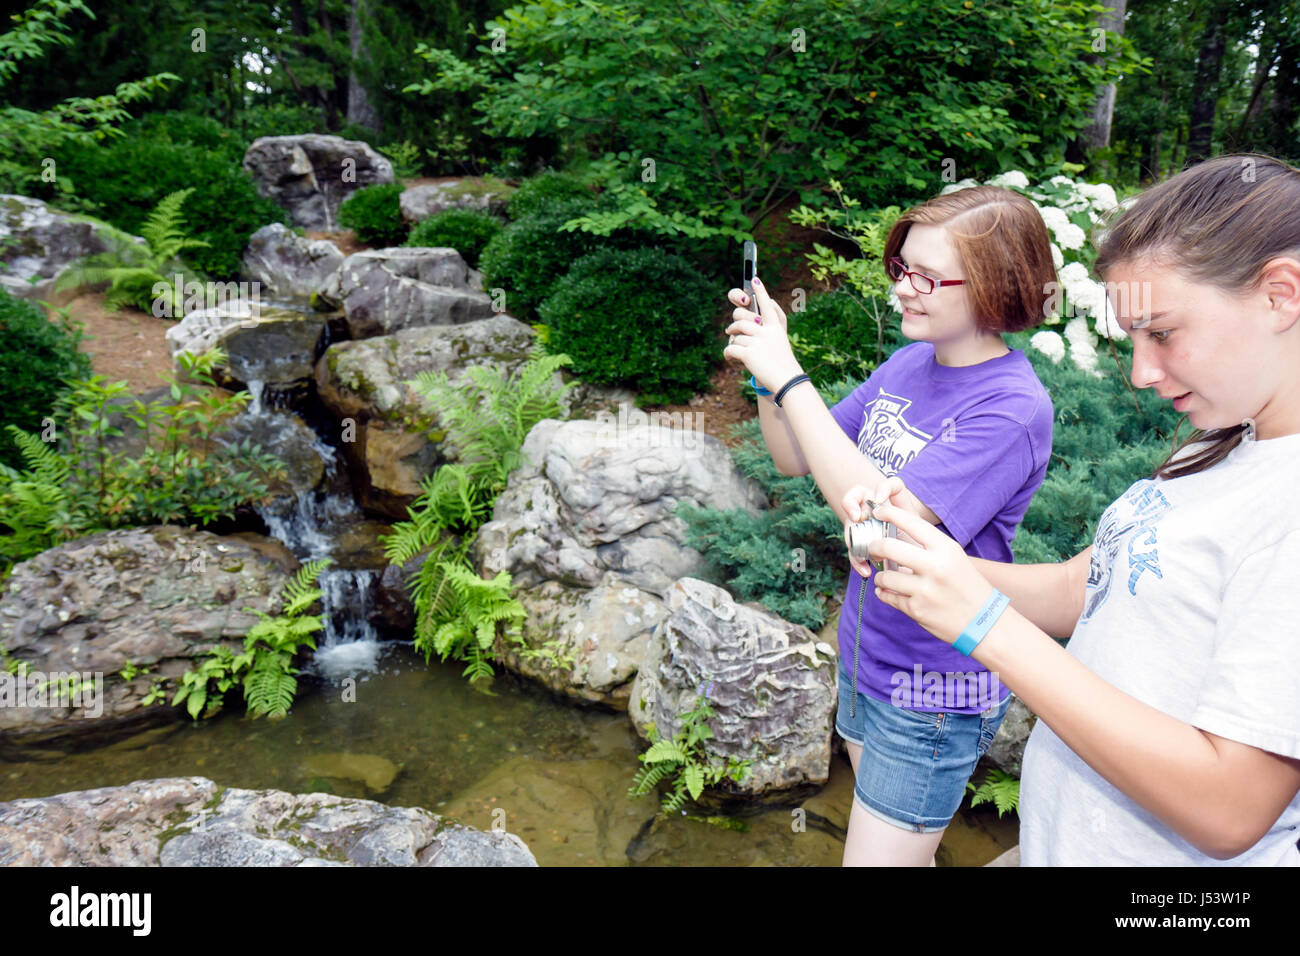 Arkansas Hot Springs,Garvan Woodland Gardens,girls,2 two,teen teens teenage teenager teenagers youth adolescent,nature,botany,flora,plant,forest,sceni Stock Photo